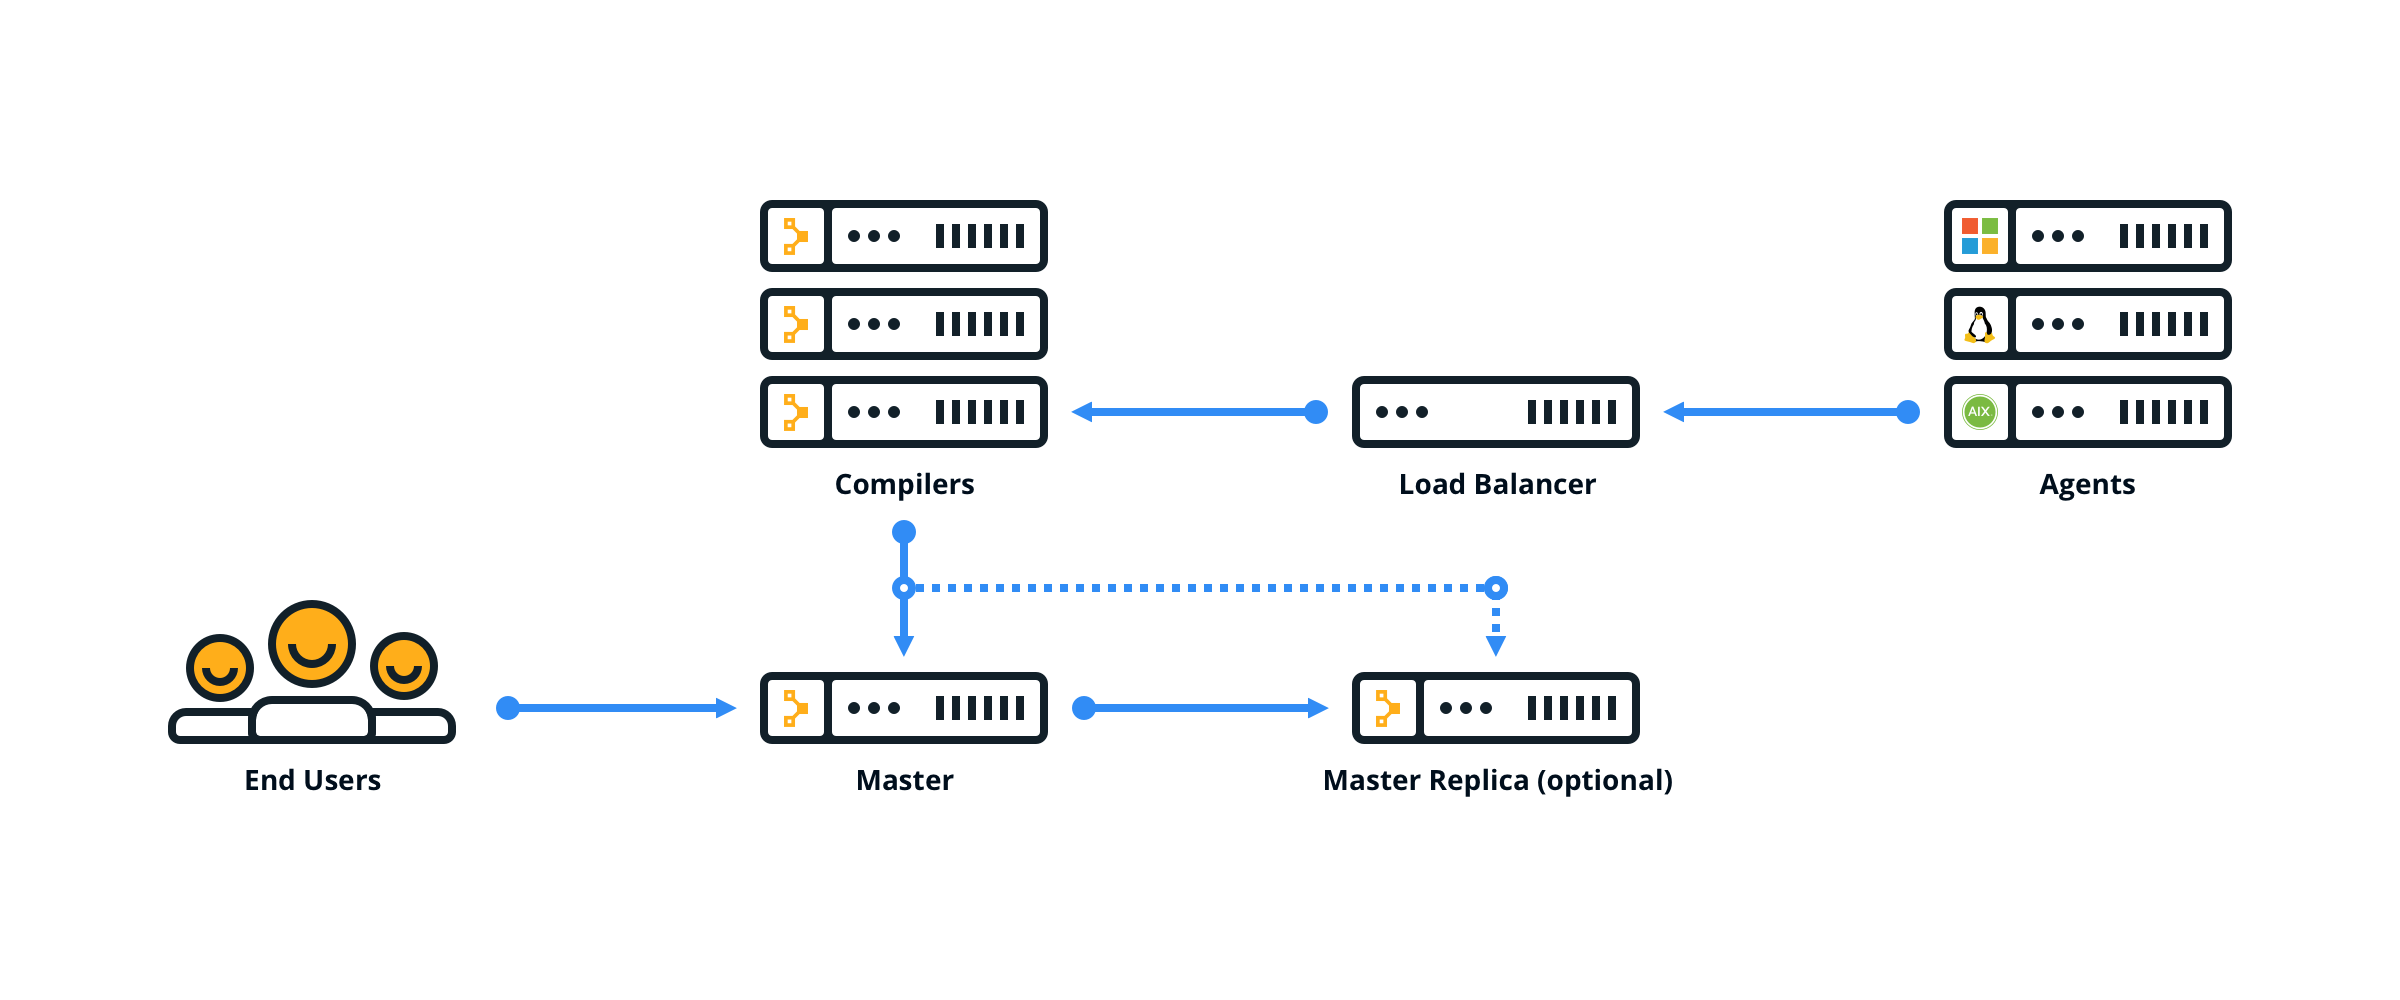 Graphic showing a large reference architecture, where end users interact with a single master. The master interacts with multiple compilers and multiple agents.